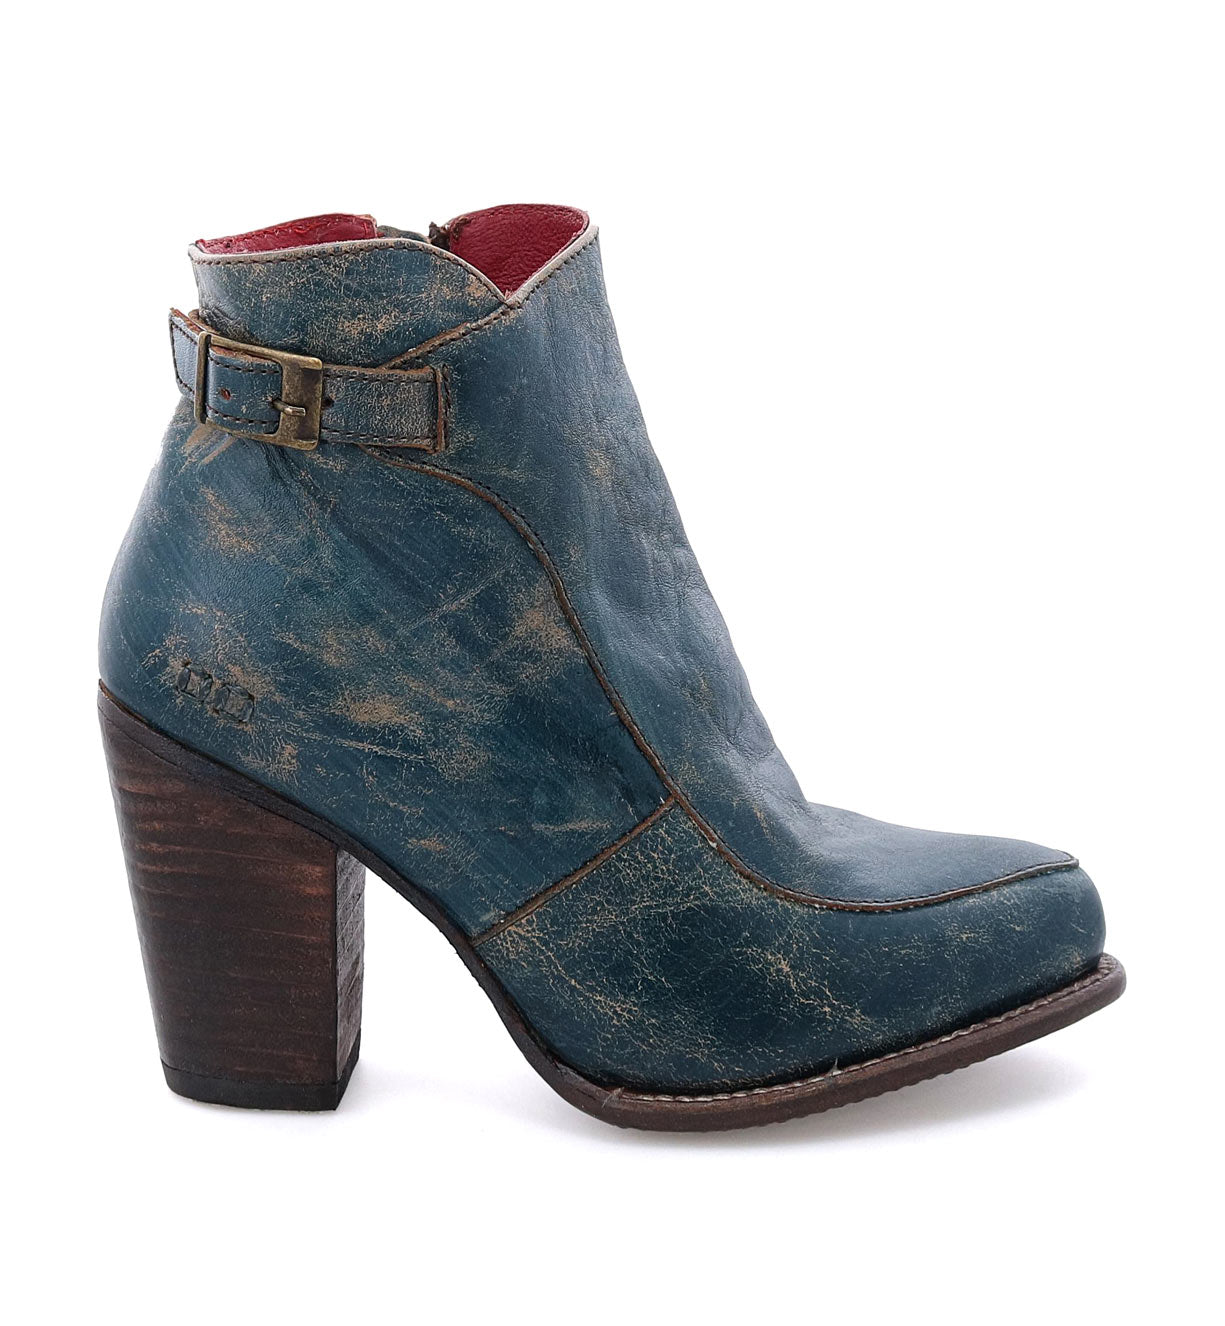 An Isla women's blue leather ankle boot with a wooden heel by Bed Stu.